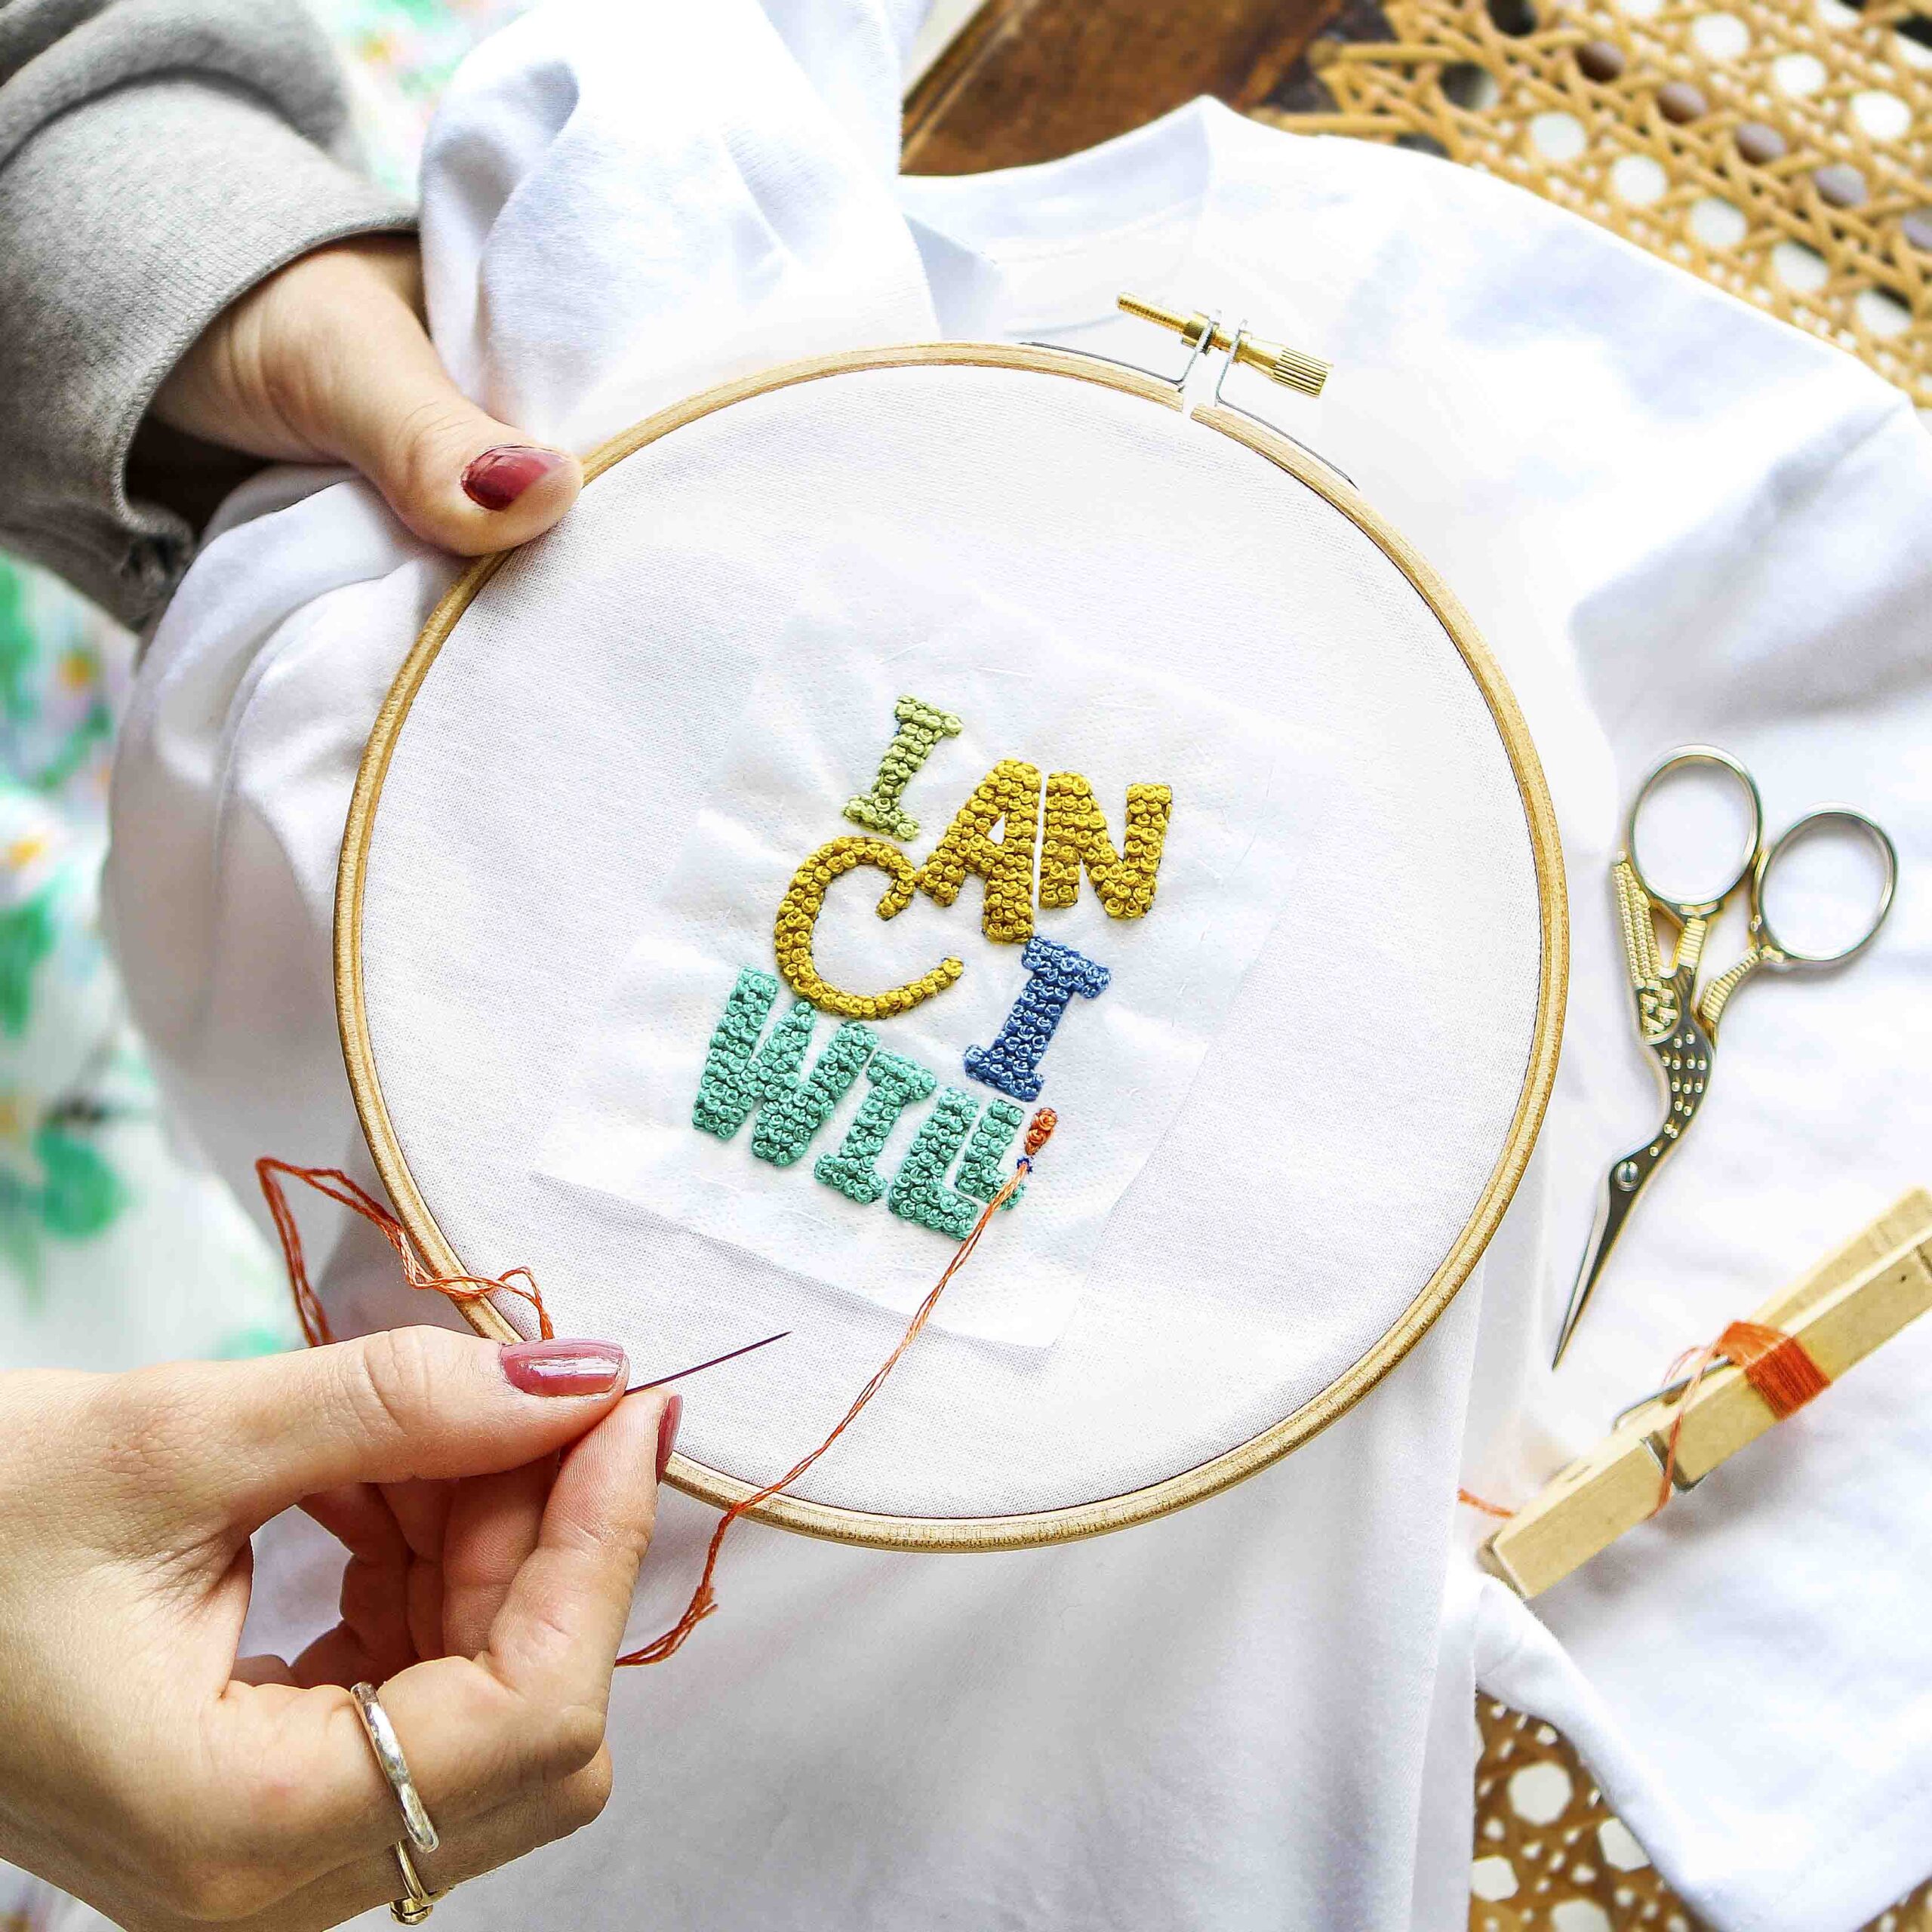 I Can, Will! DIY Embroidery Kit - StephieAnn Design